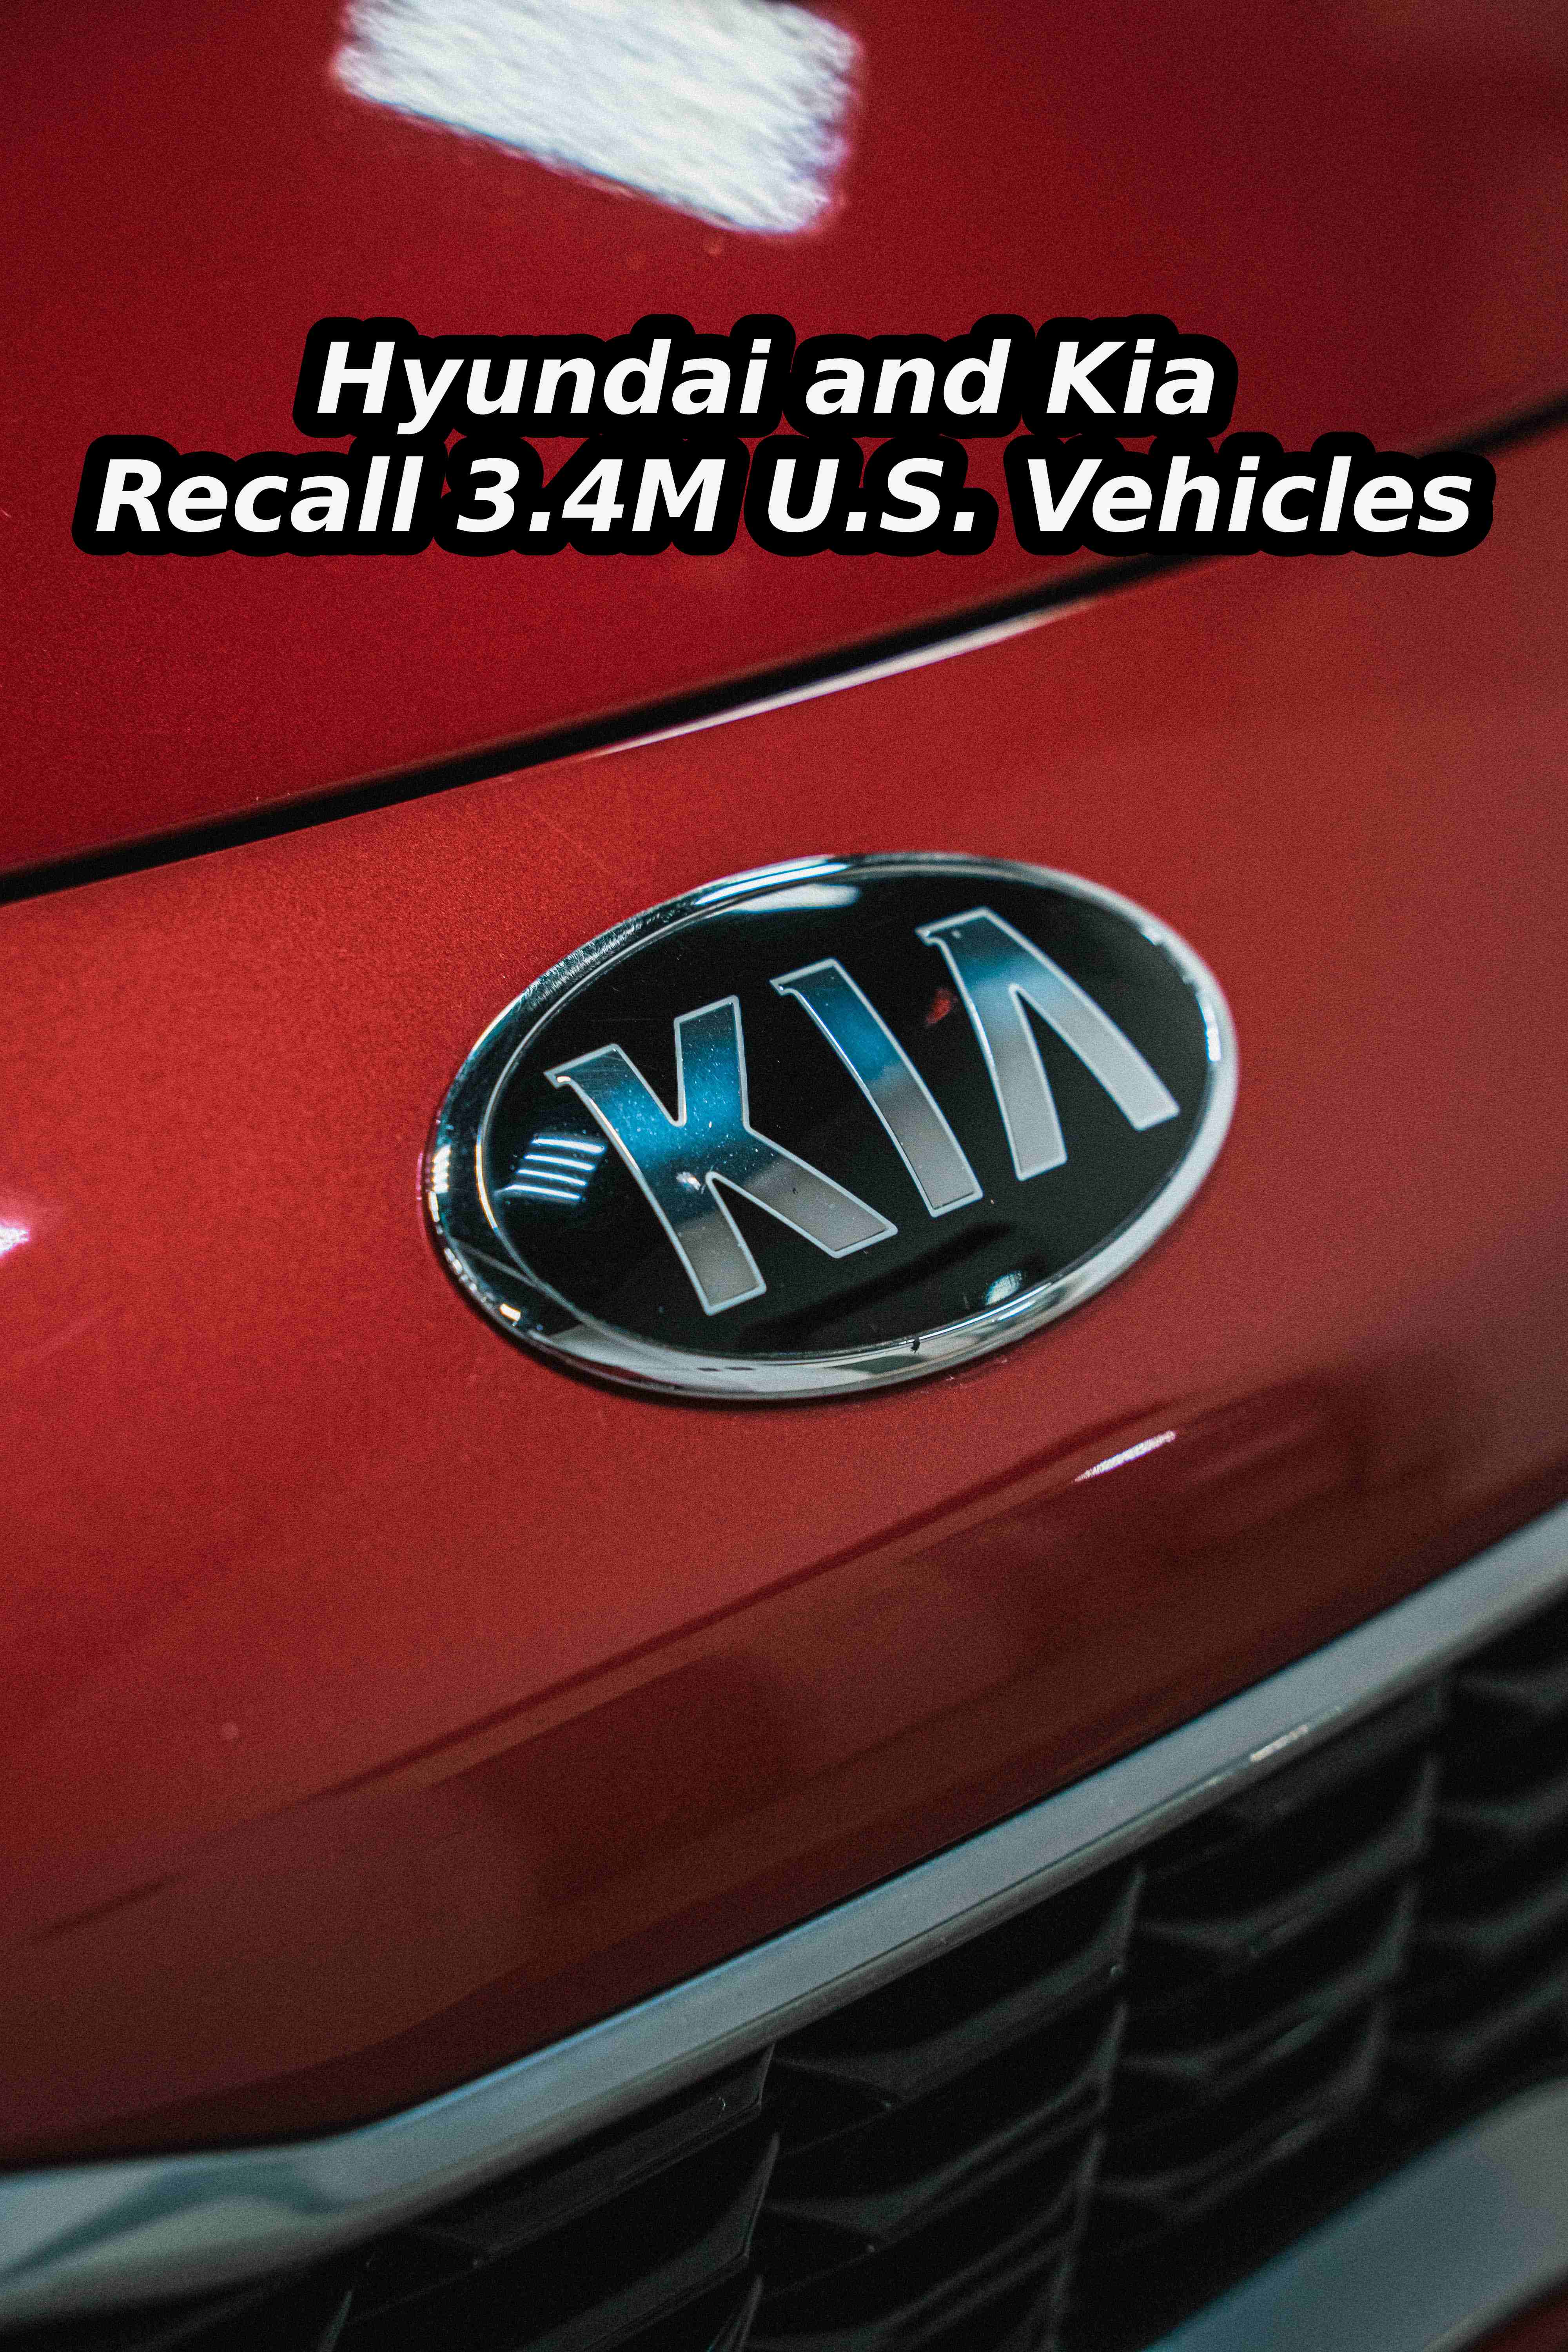 Hyundai and Kia Recall 3.4M U.S. Vehicles; Advise Parking Outside Due to Fire Concerns